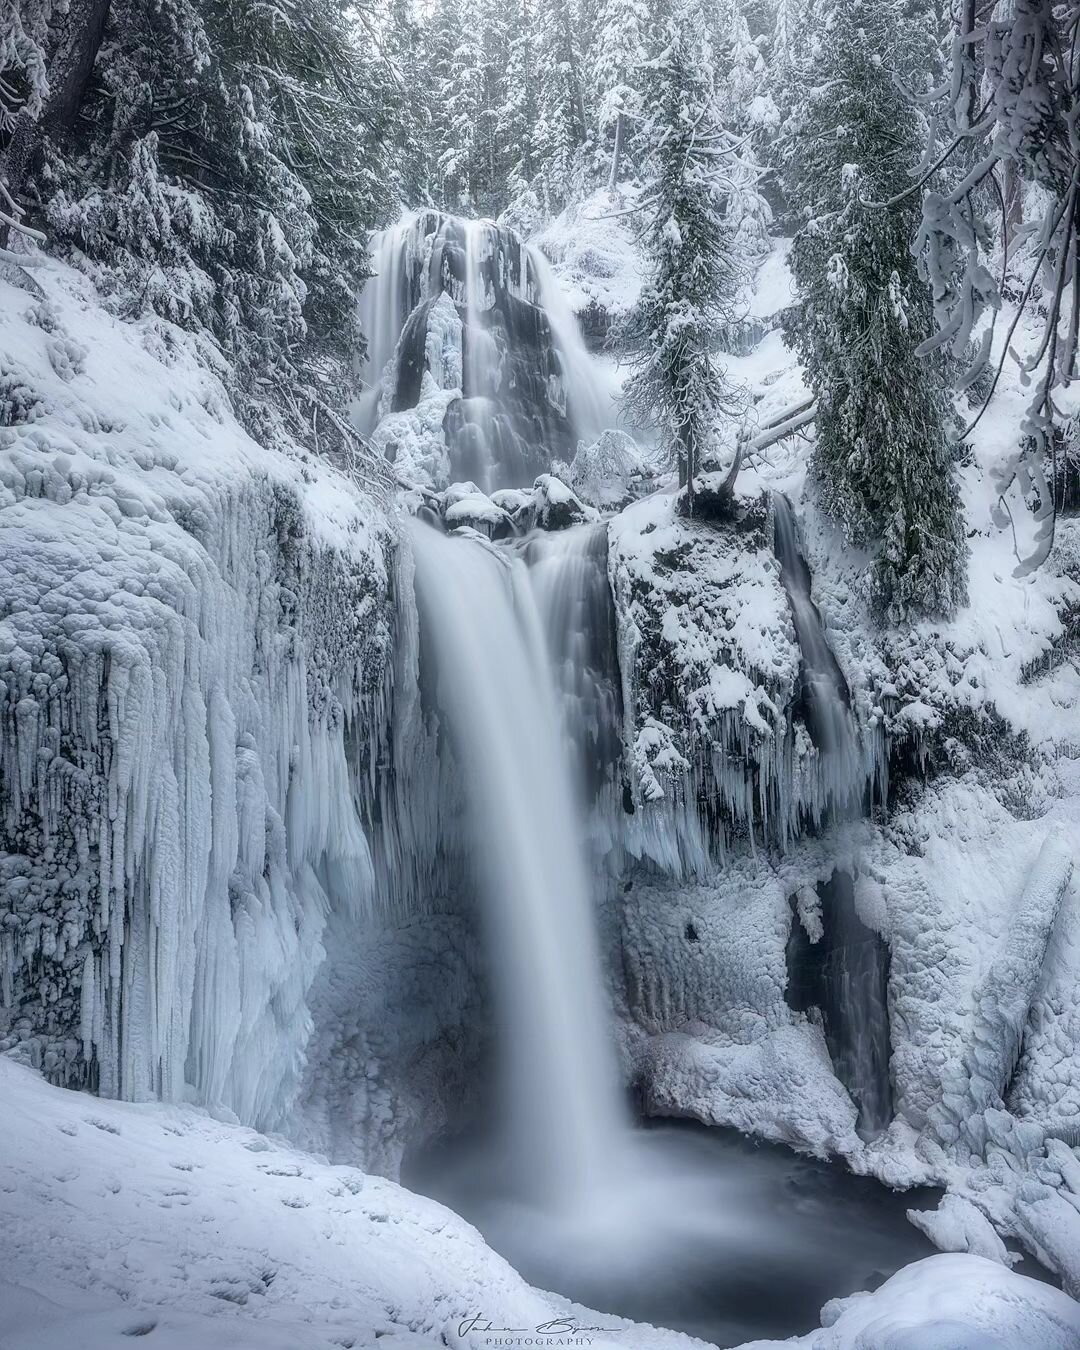 Frozen Falls
____________________________________________ 

To this day my favorite hike I've done since moving to the PNW. Such a blast to see so much snow and ice on an iconic Washington waterfall.
________________________________________ 

Image D